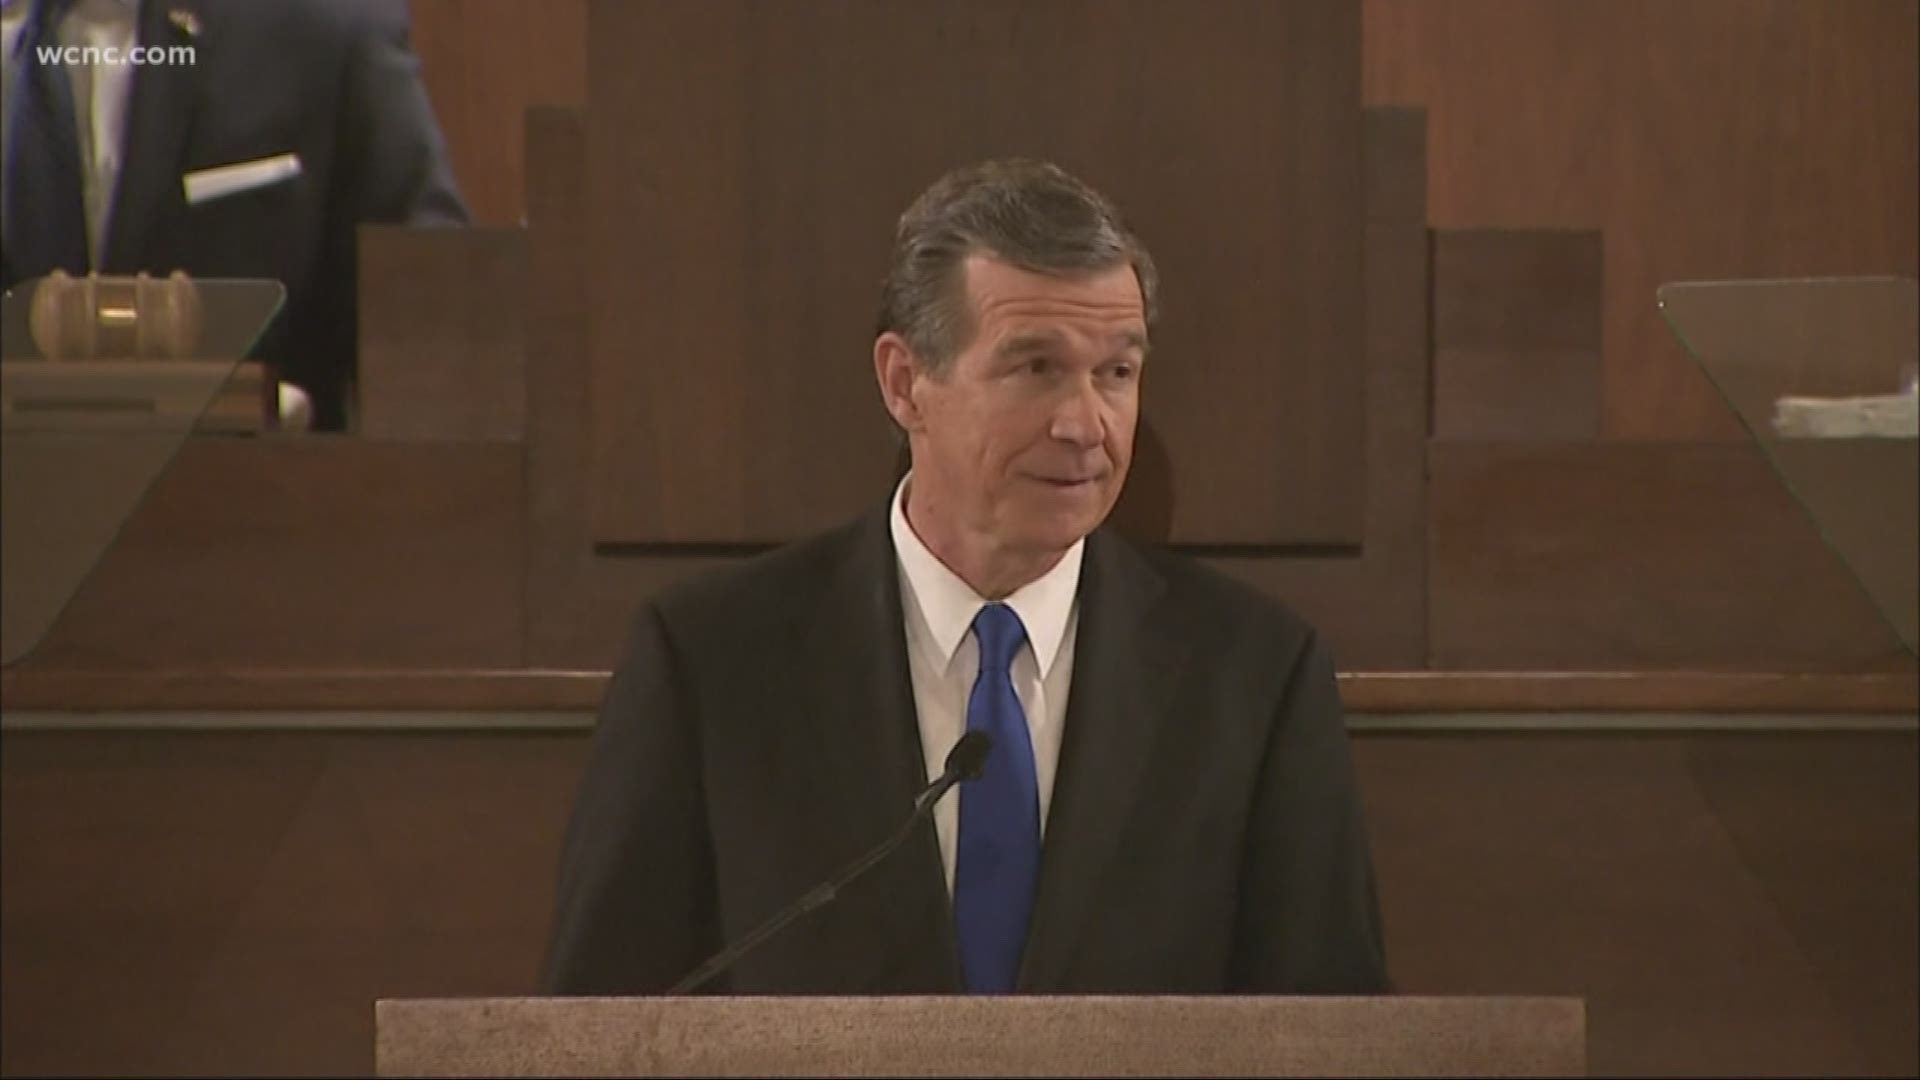 North Carolina Gov. Roy Cooper is asking for a big investment in education as part of his 2019 state budget, requesting $2 billion for public schools.